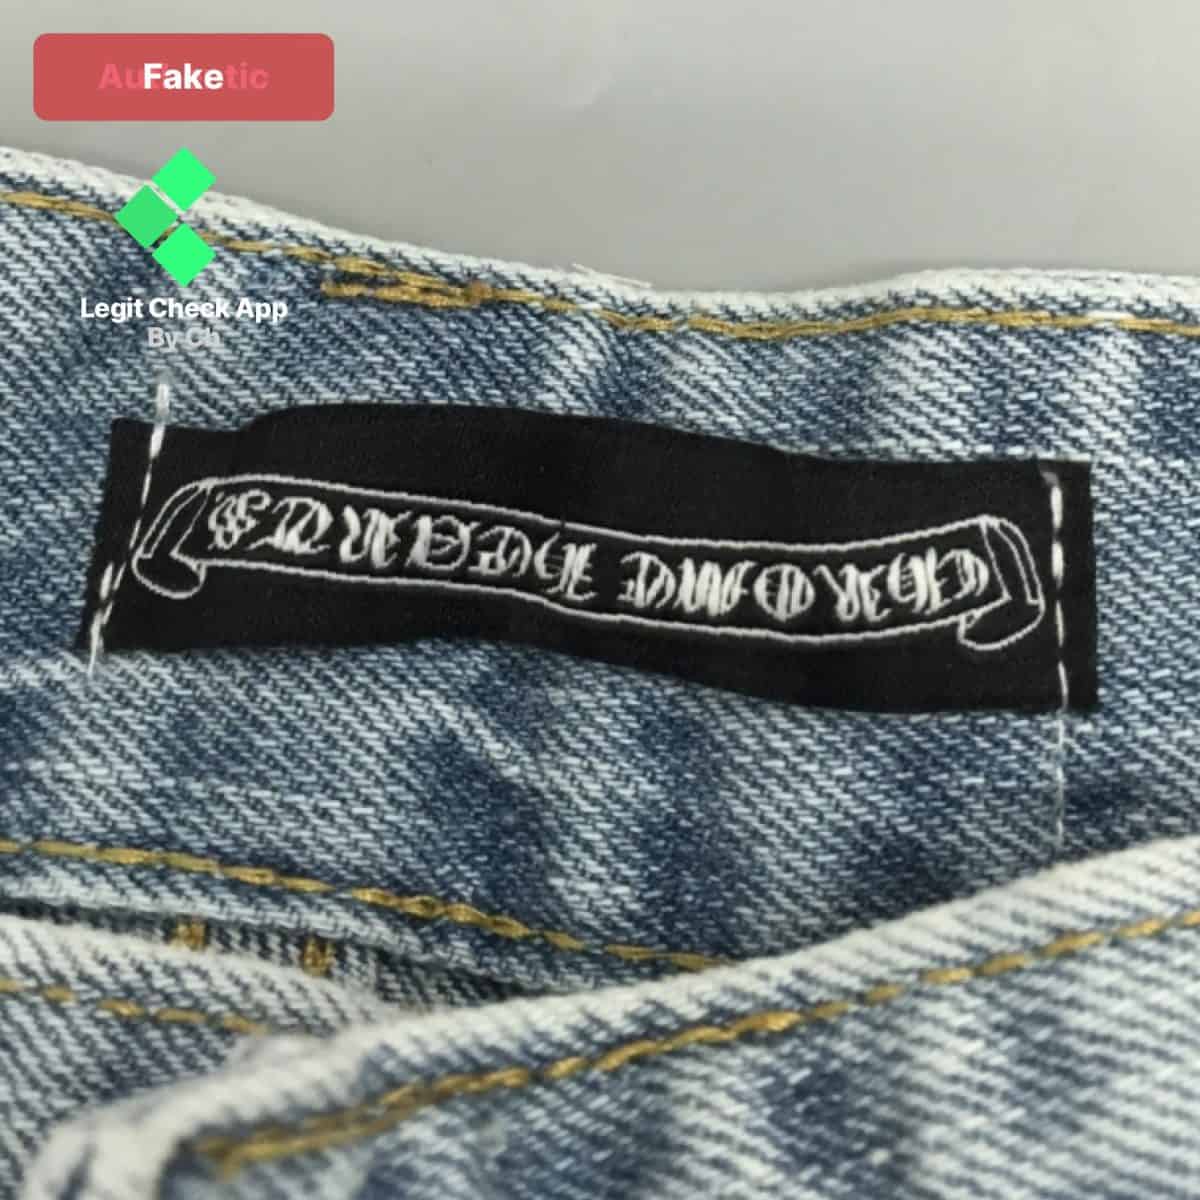 fake chrome hearts jeans label